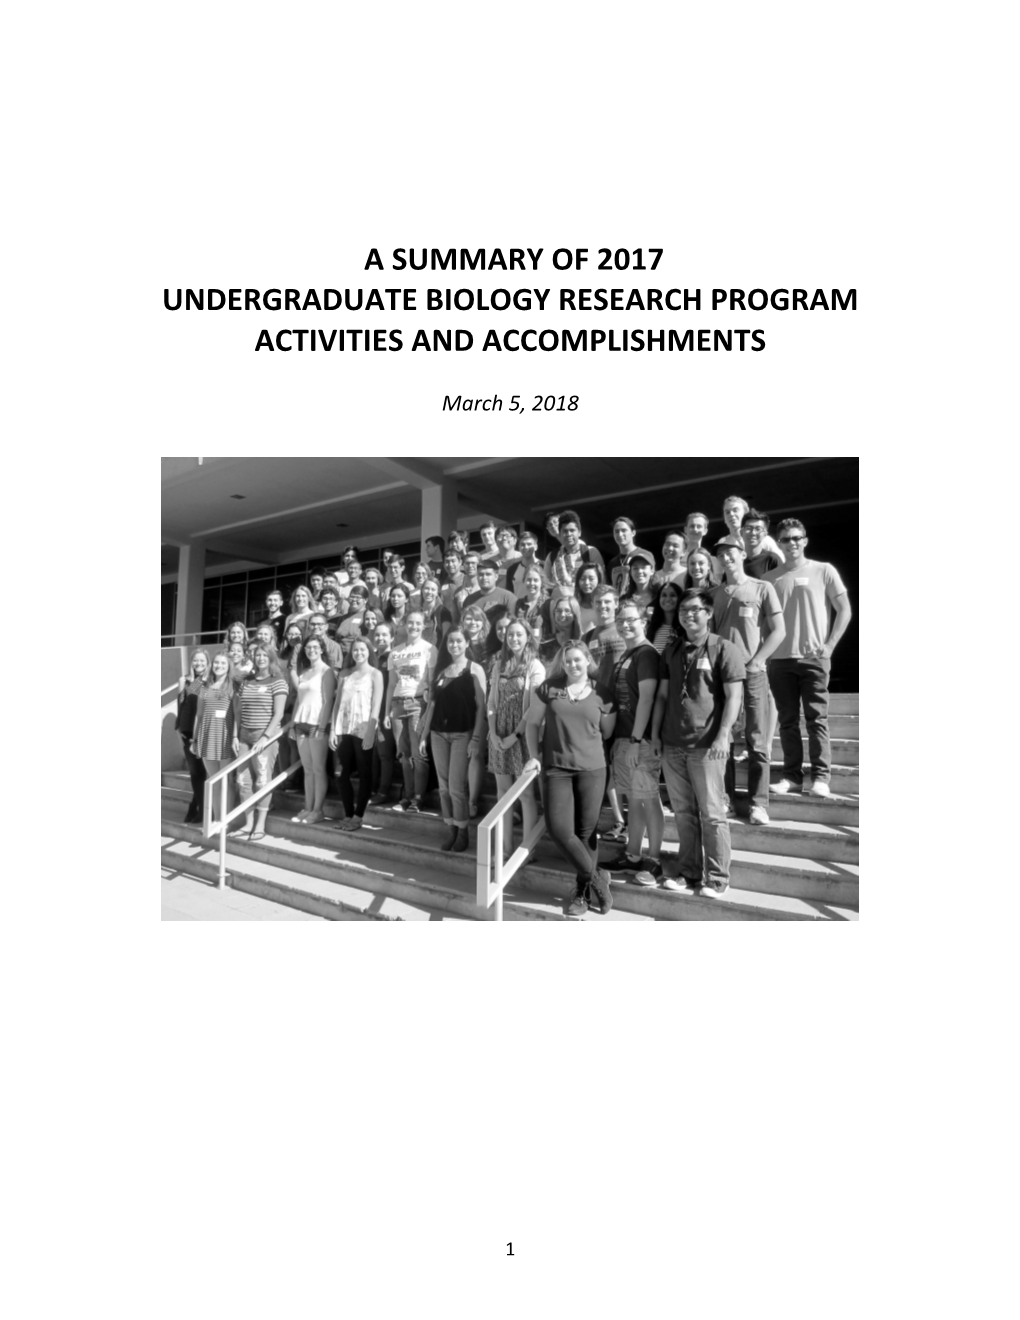 A Summary of 2017 Undergraduate Biology Research Program Activities and Accomplishments